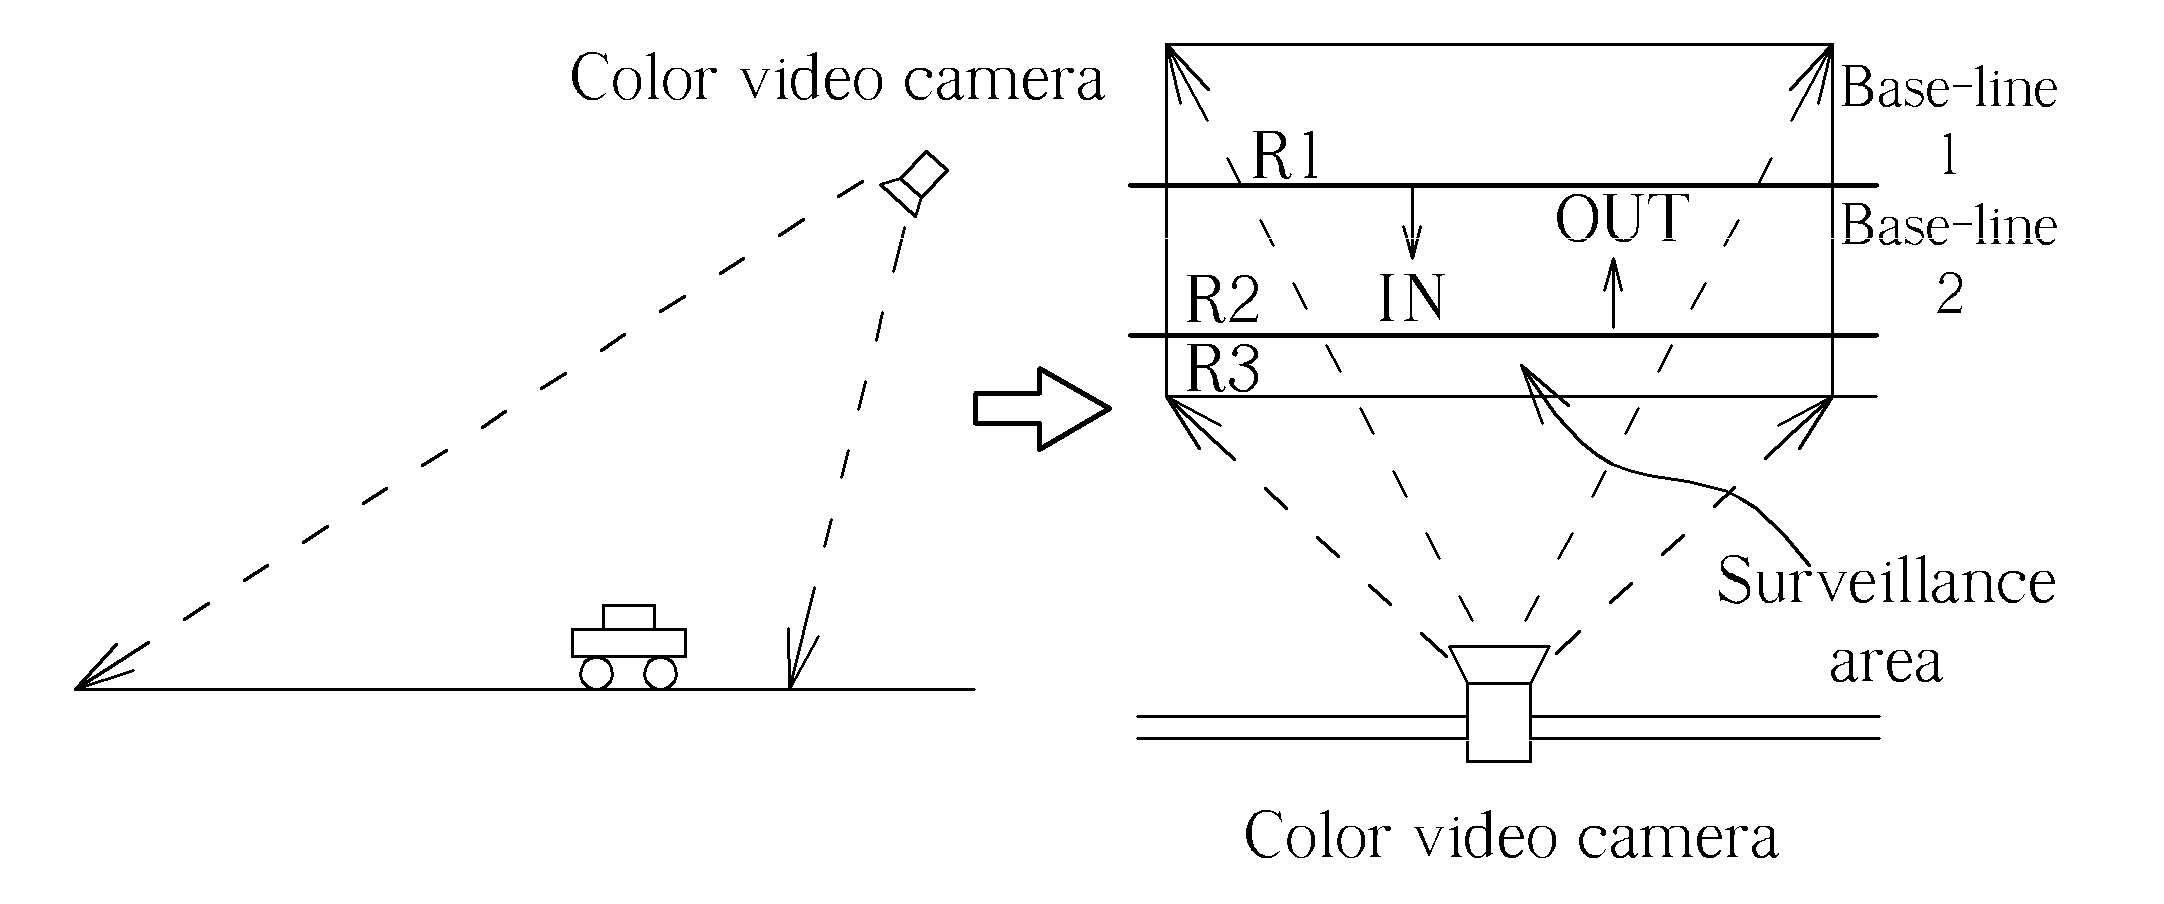 Method of detecting moving objects